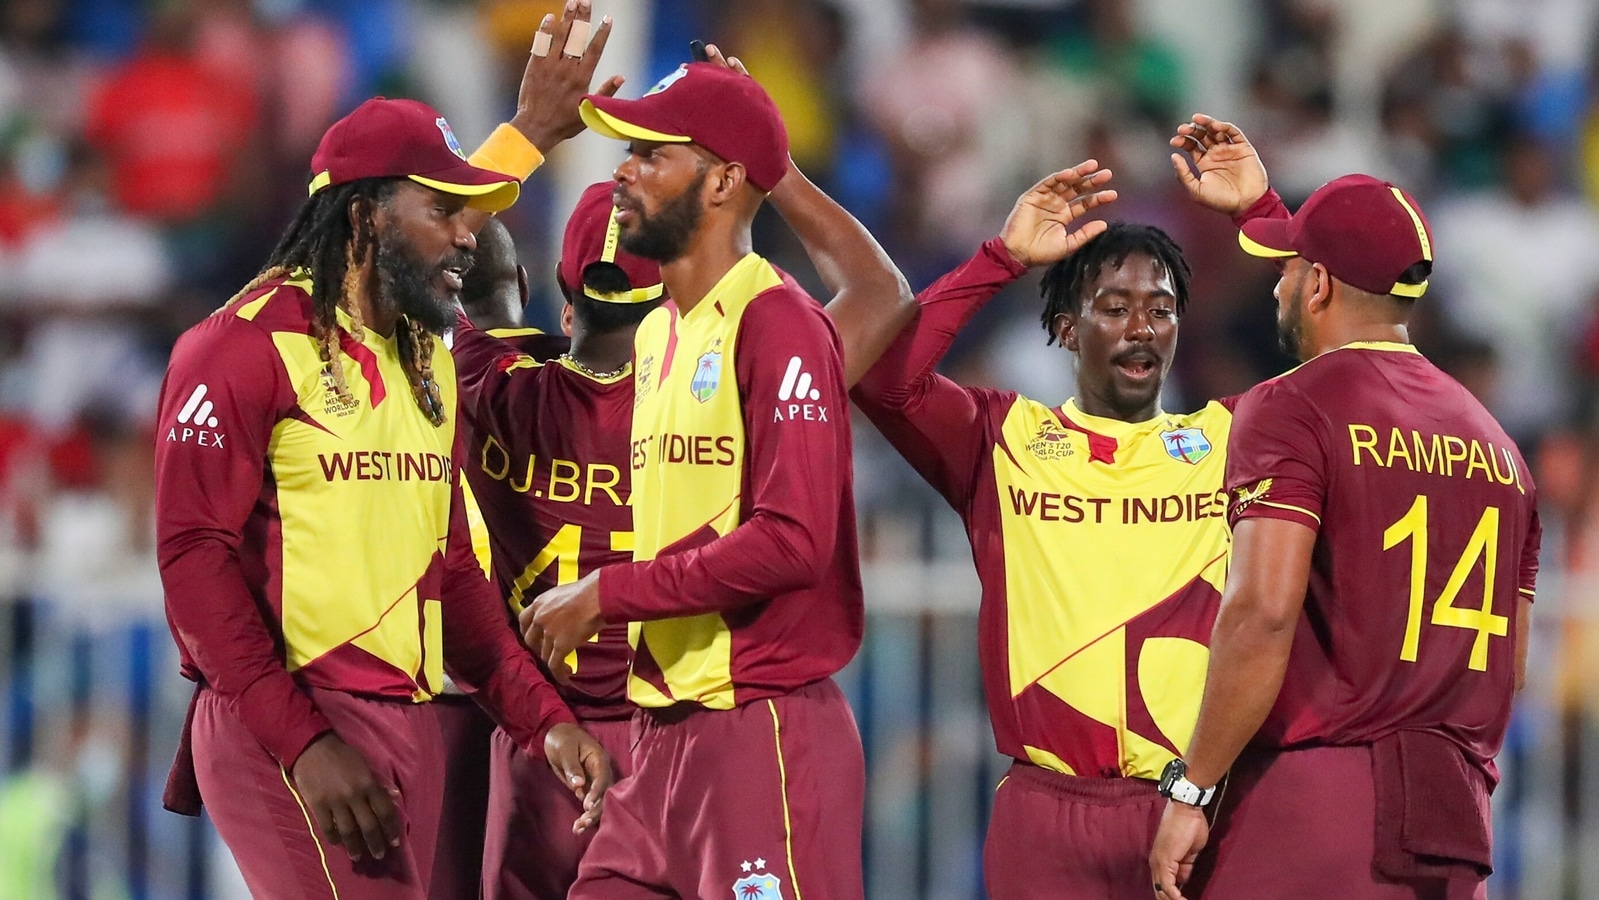 West Indies vs Sri Lanka, T20 World Cup Live score and updates Cricket